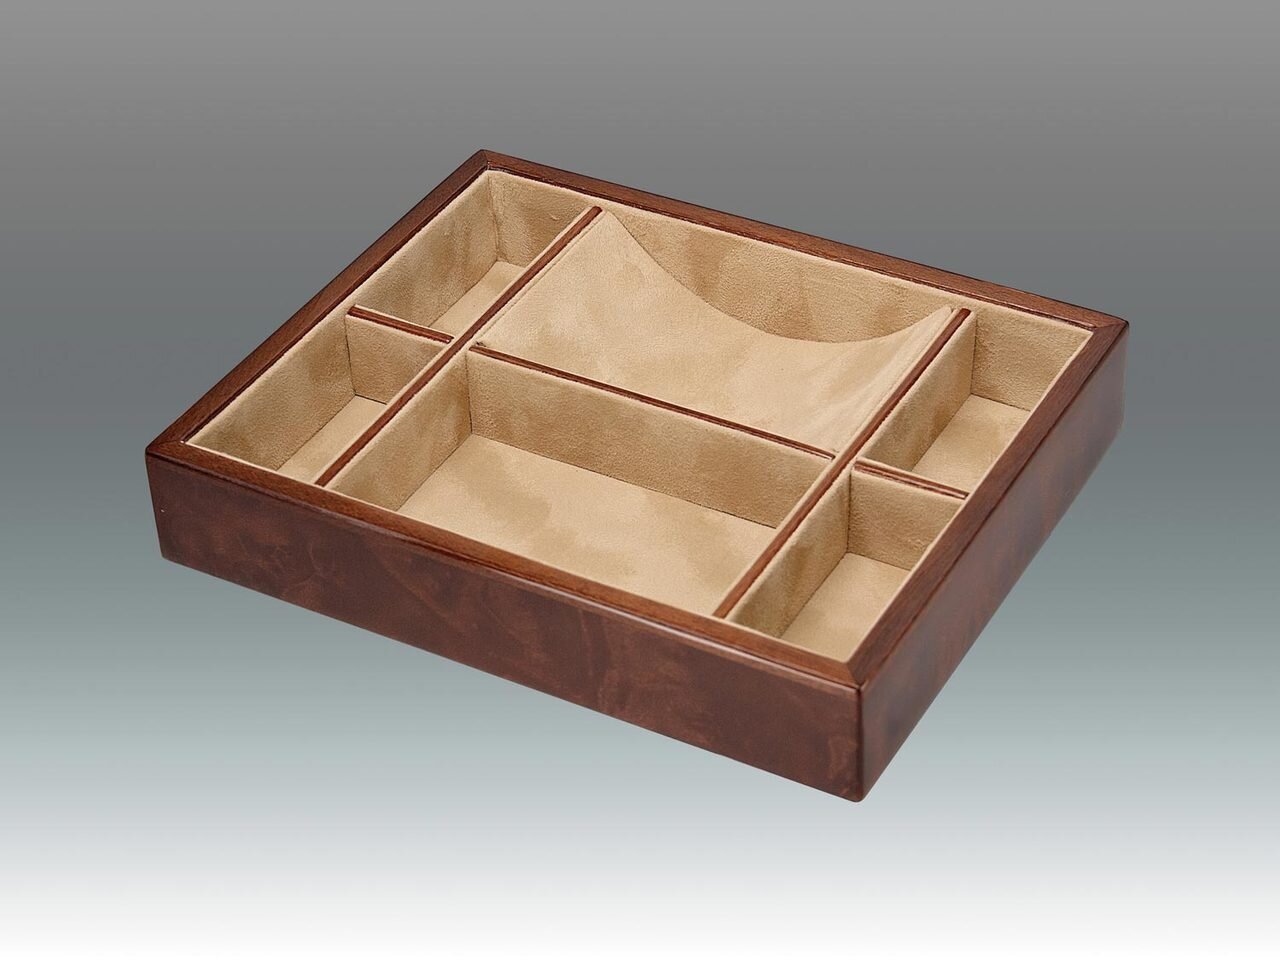 Tizo 10.25 x 8.25 Inch Sectional Wooden Valet Tray - Brown